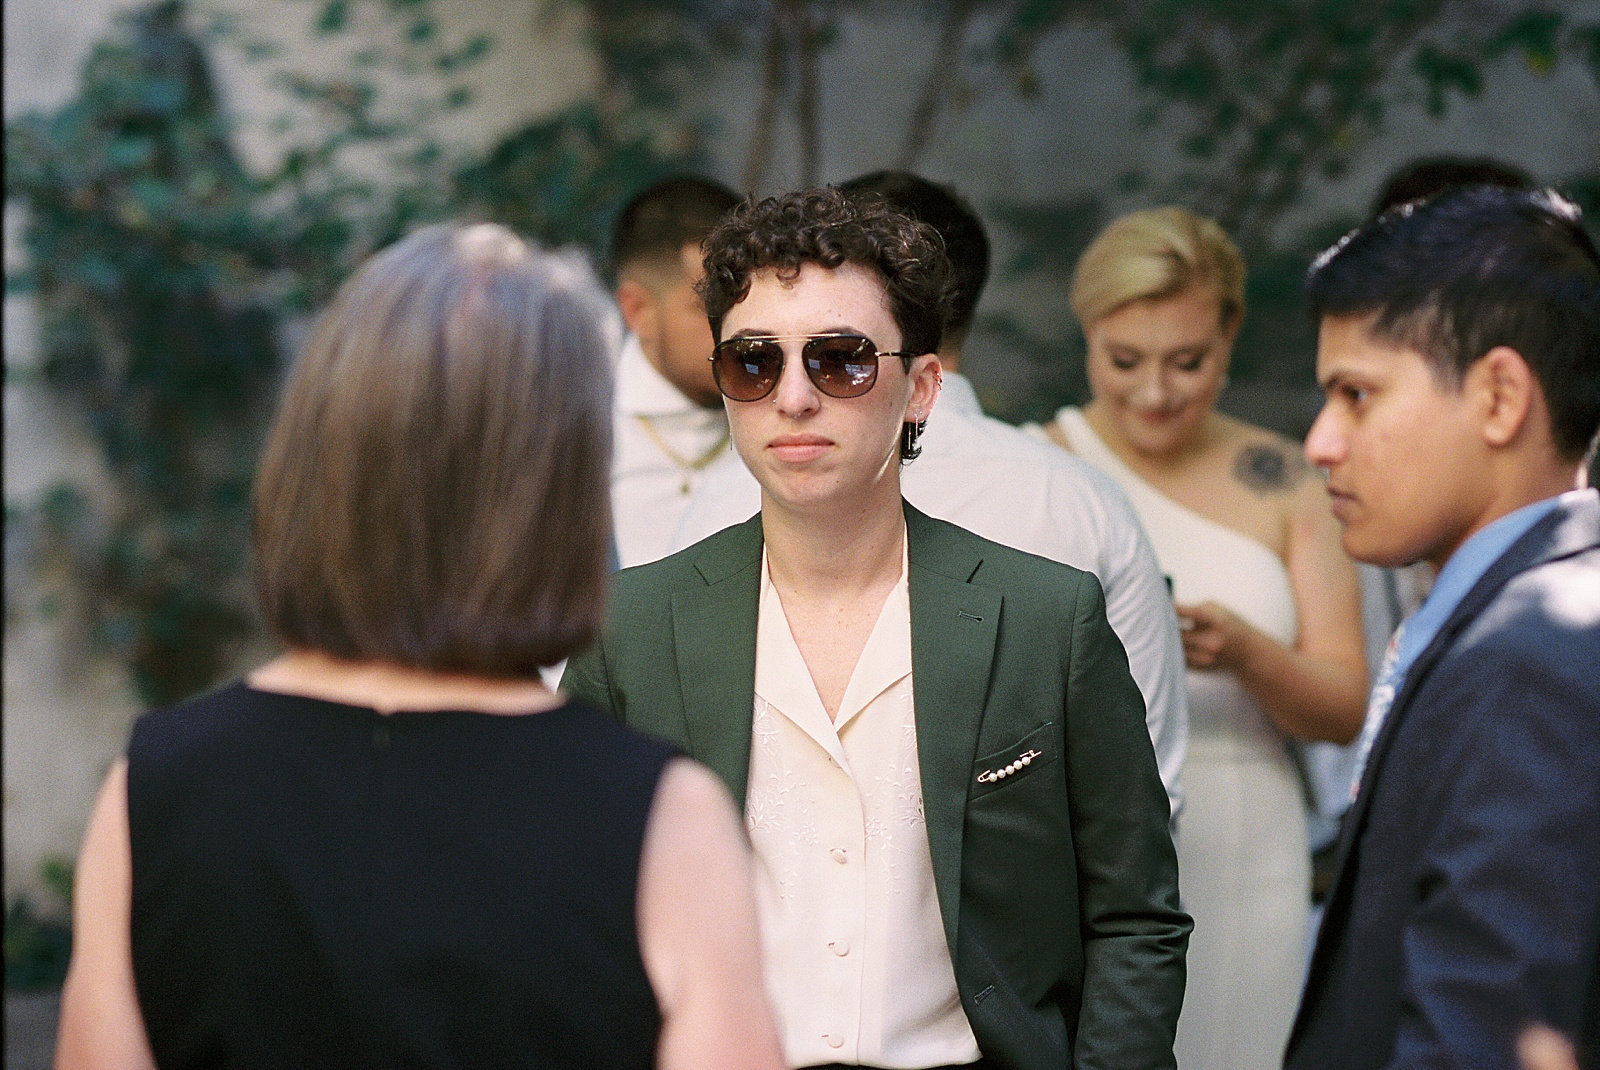 A wedding guest in a green suit wears sunglasses.